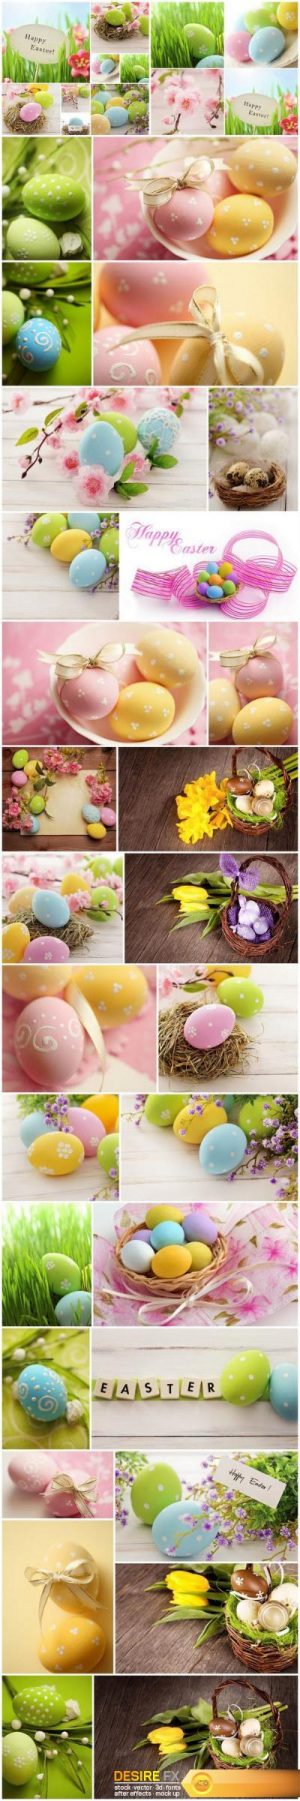 Easter Eggs and Happy Easter 3 – Set of 30xUHQ JPEG Professional Stock Images